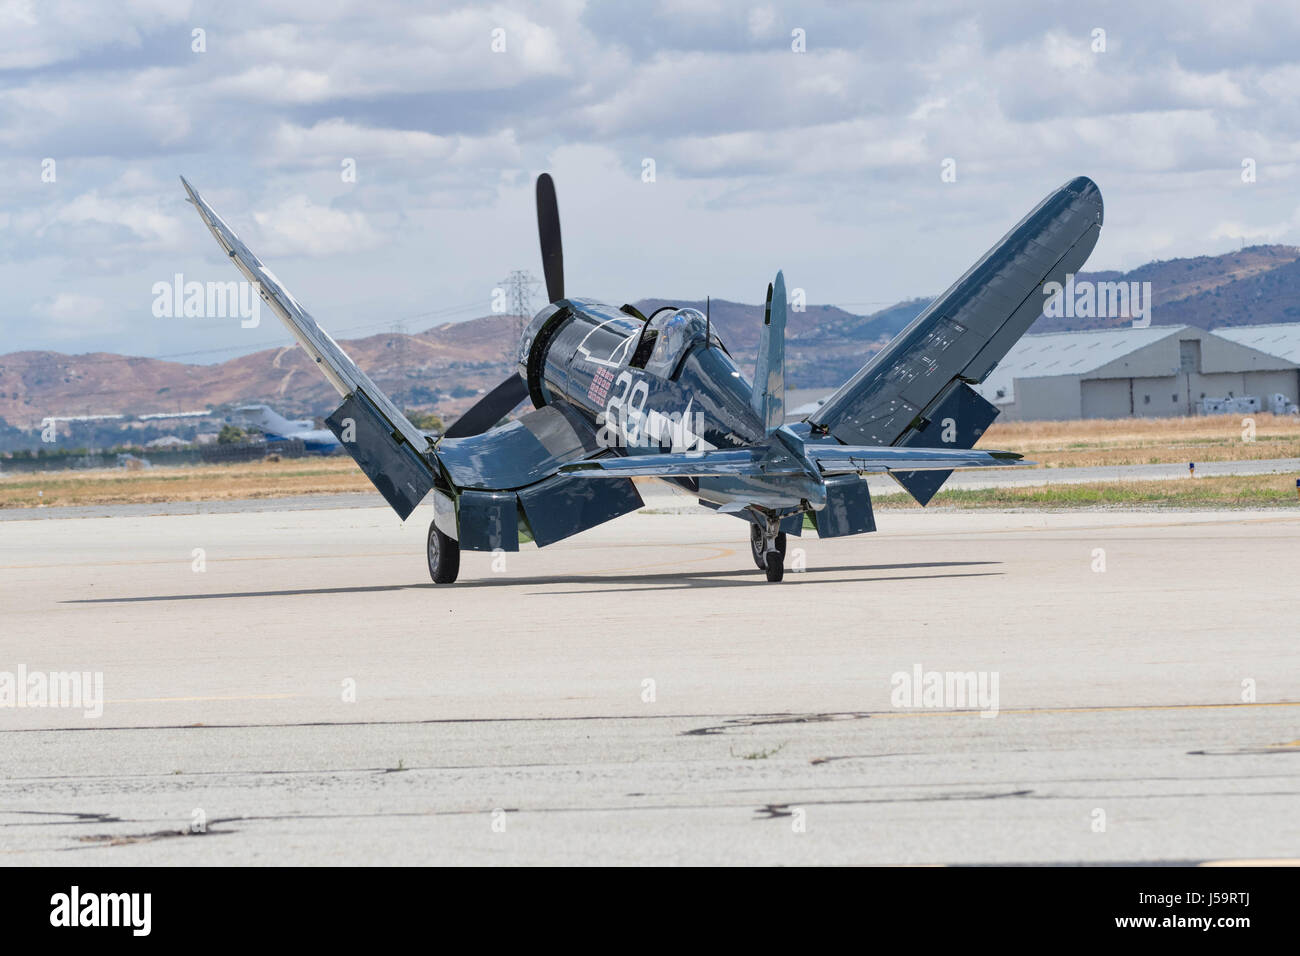 Chino, USA - May 7 2017: Plane taxiing on display during Planes of Fame Air Show in Chino Airport. Stock Photo